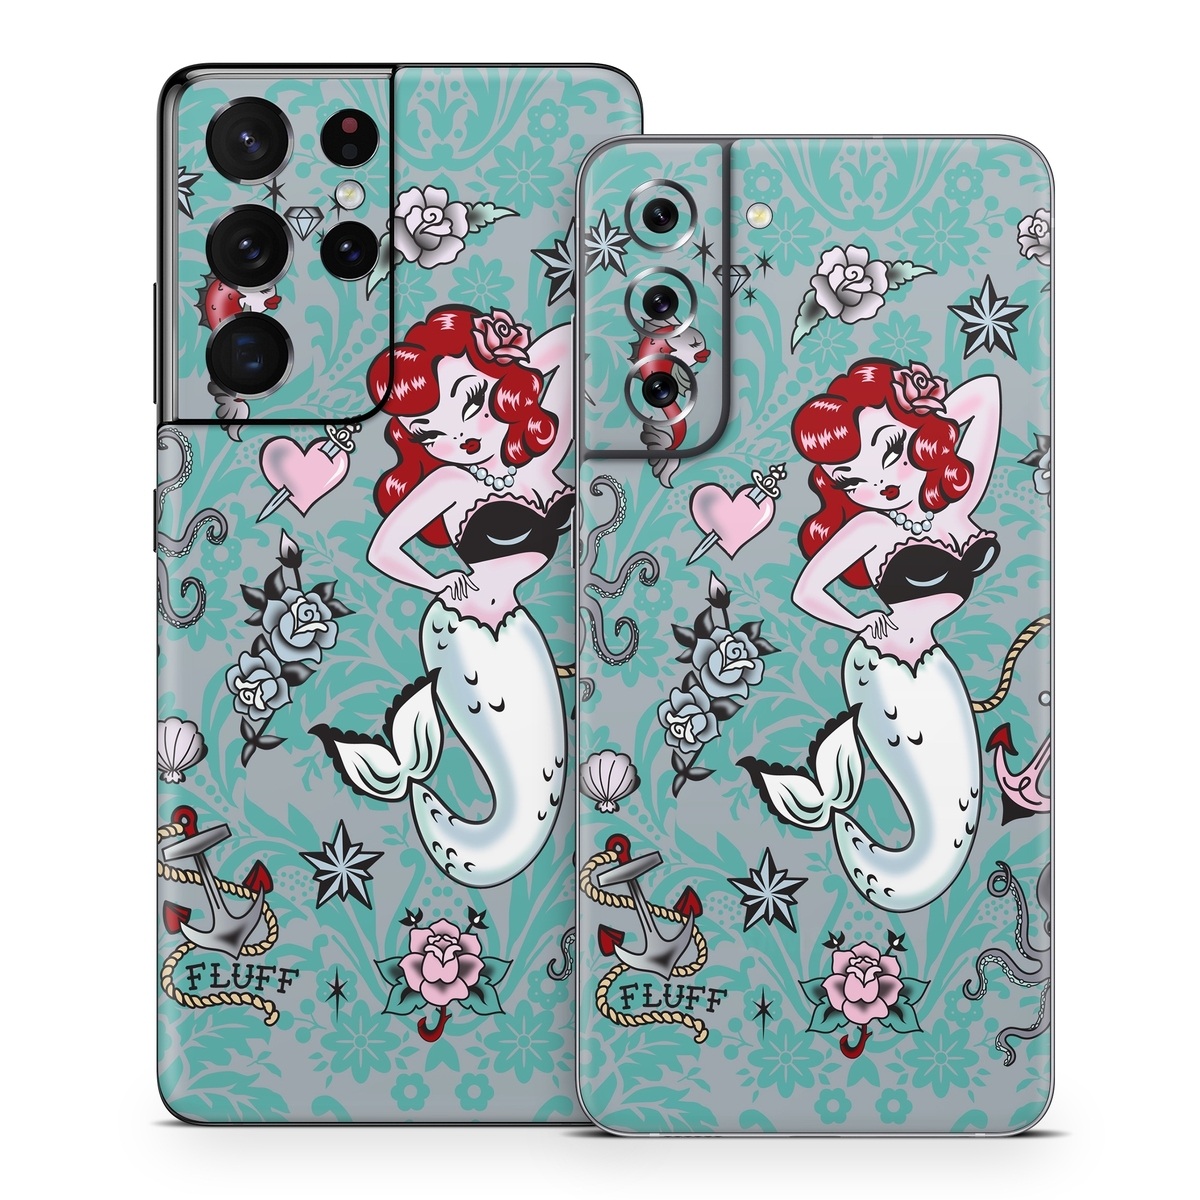 Samsung Galaxy S21 Series Skin design of Mermaid, Illustration, Fictional character, Organism, Art, Pattern, Style, with gray, blue, black, red, white, pink colors